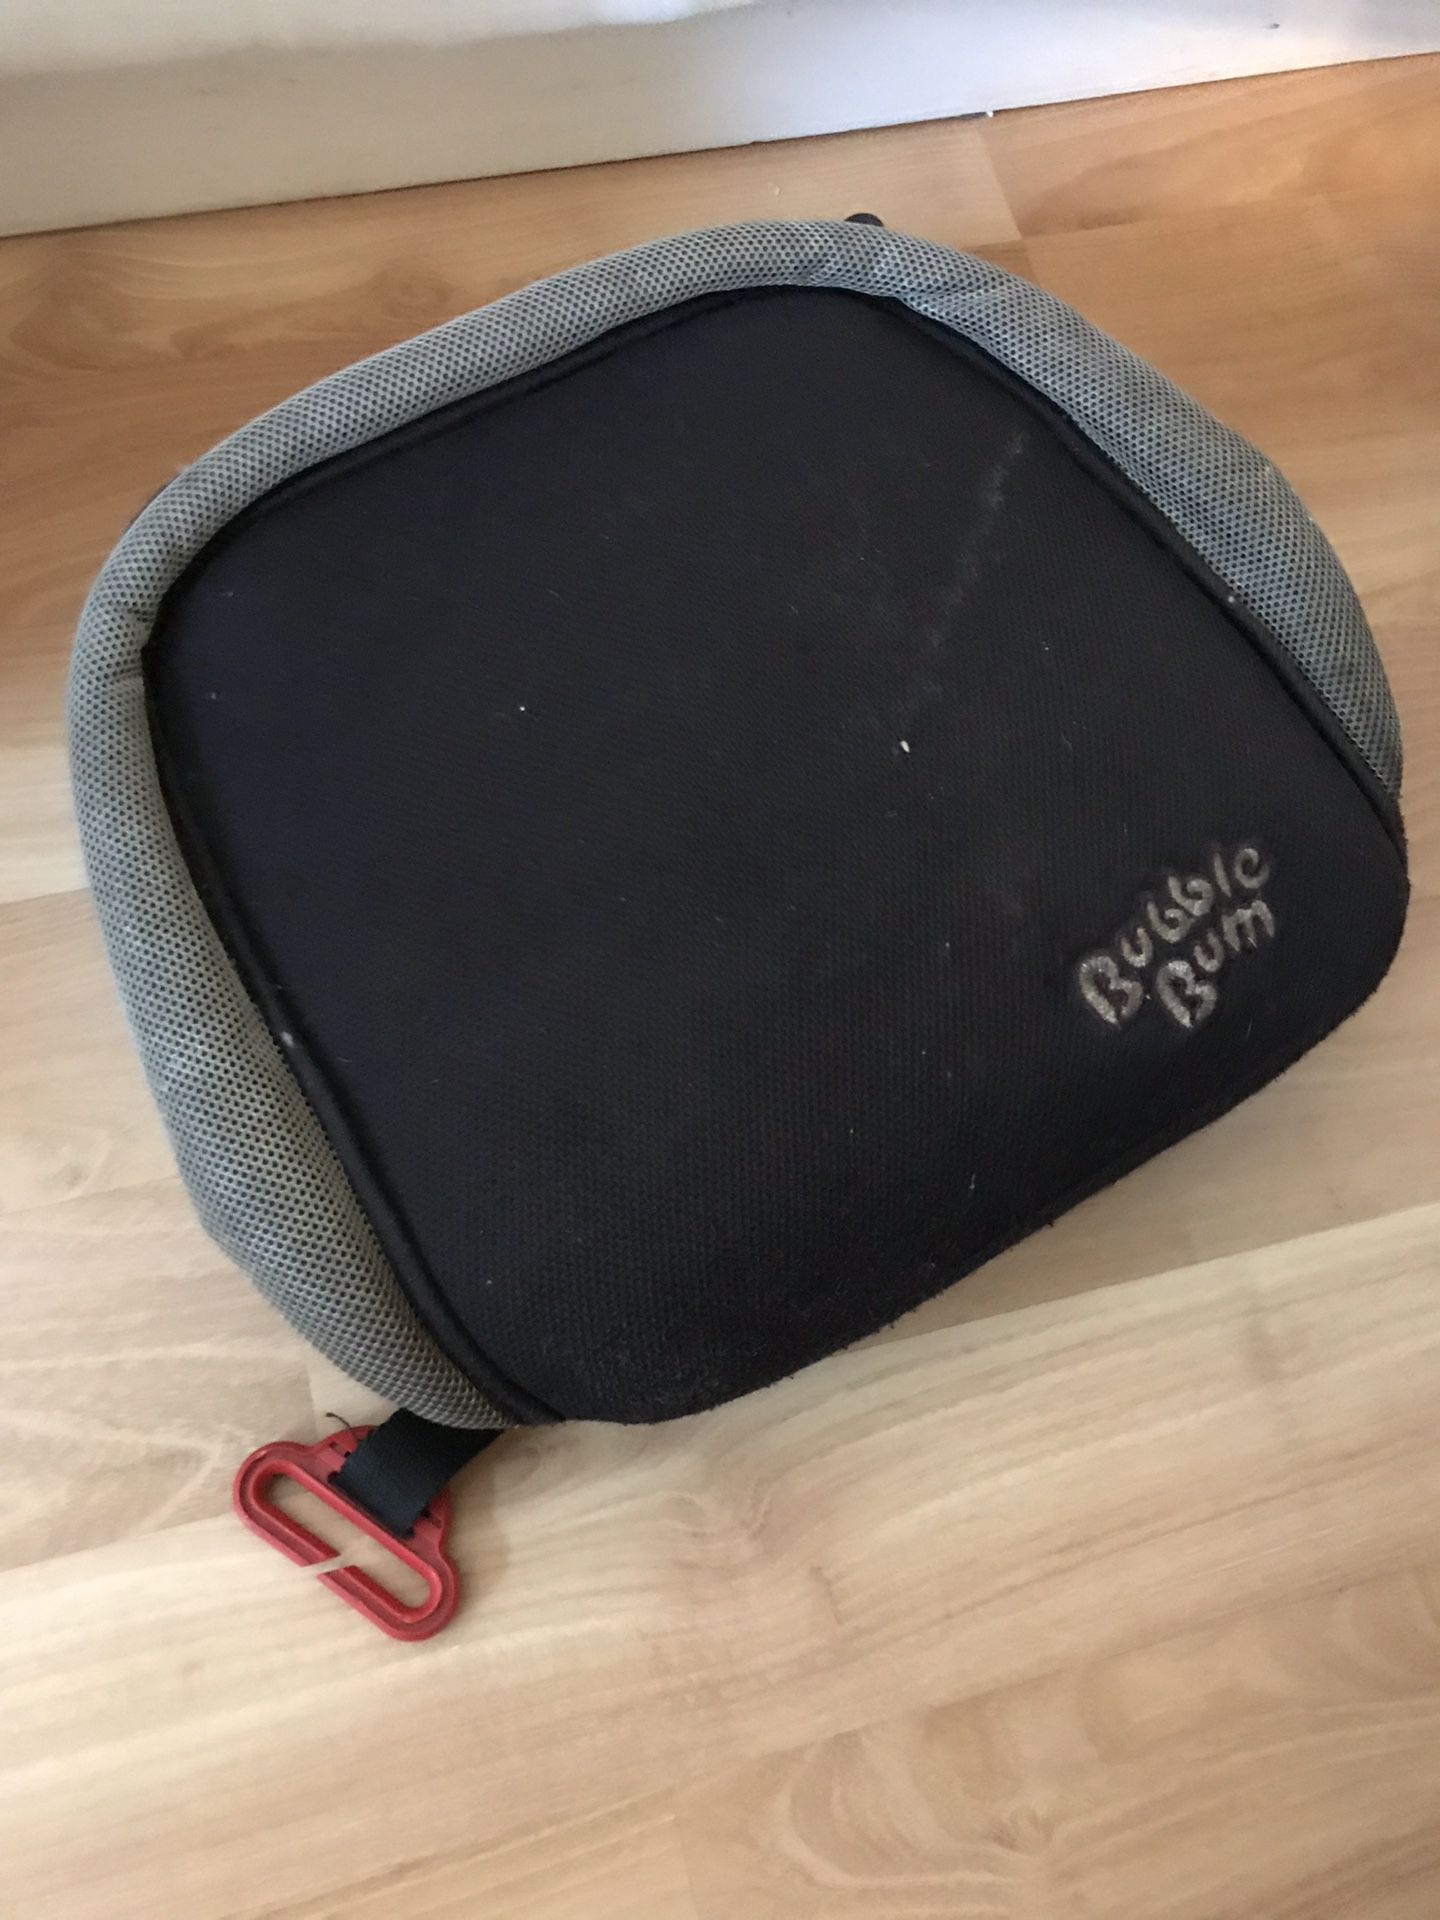 Kids inflatable booster seat